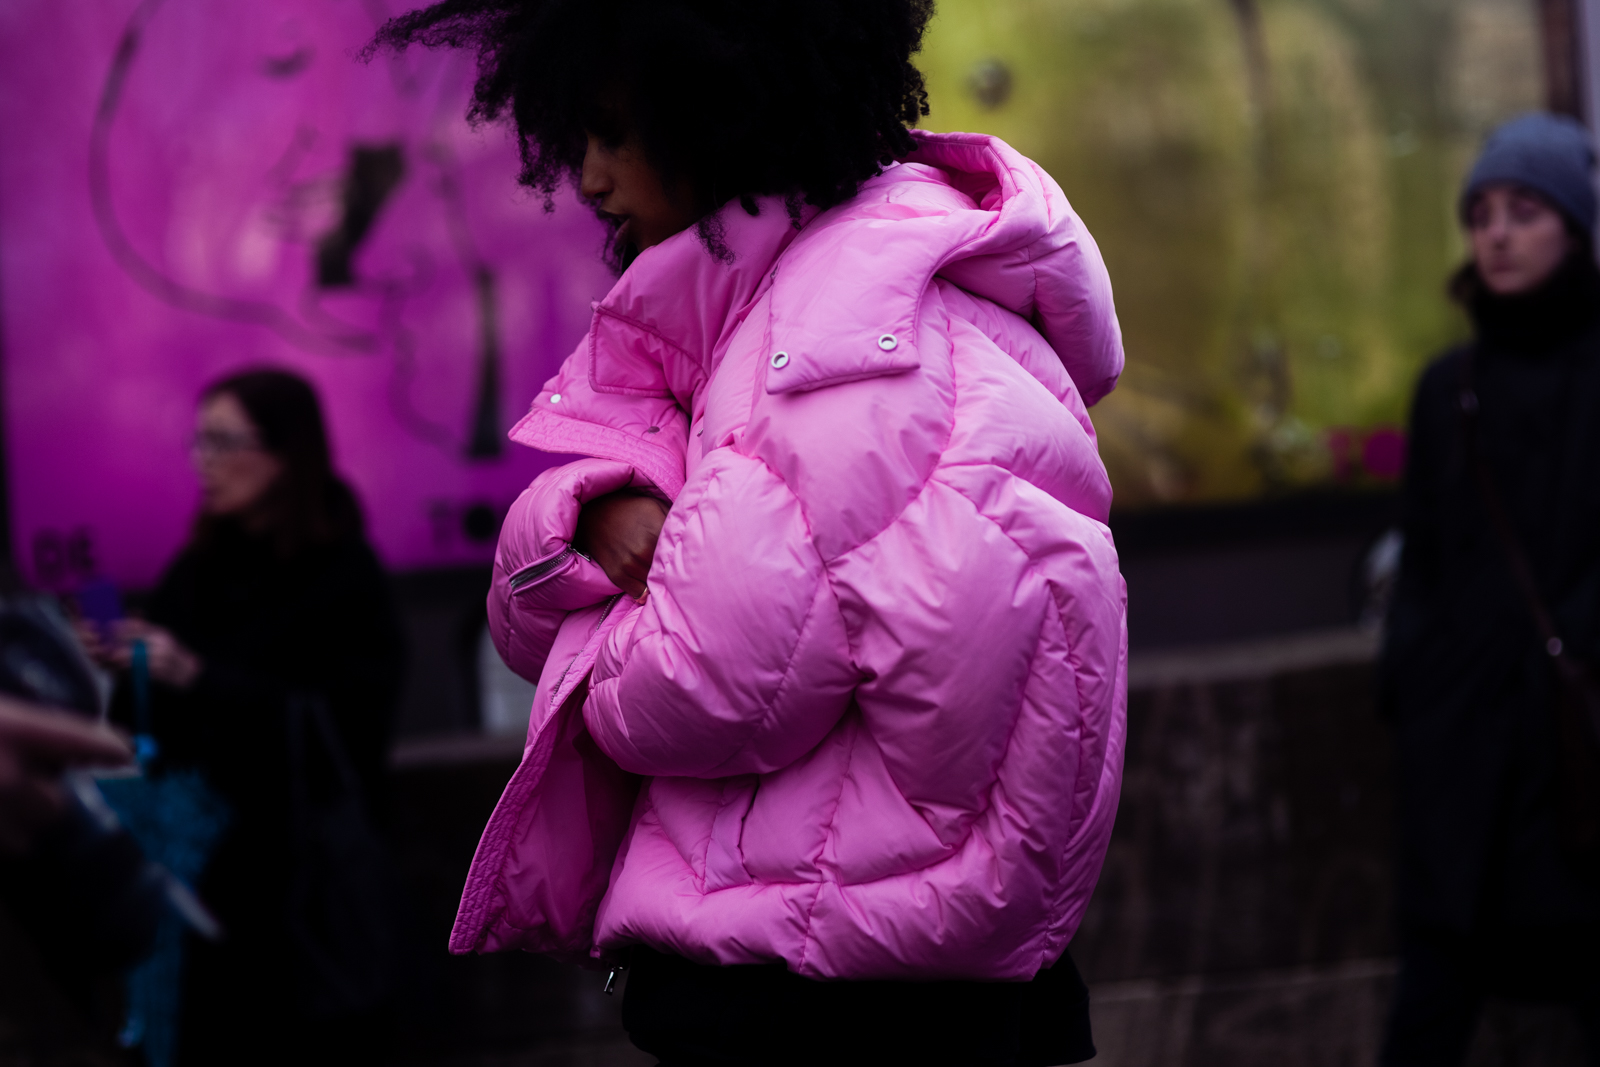 Julia Sarr Jamois wearing a pink puffer jacket and Vetements black hoodie before a fashion show in Paris, France